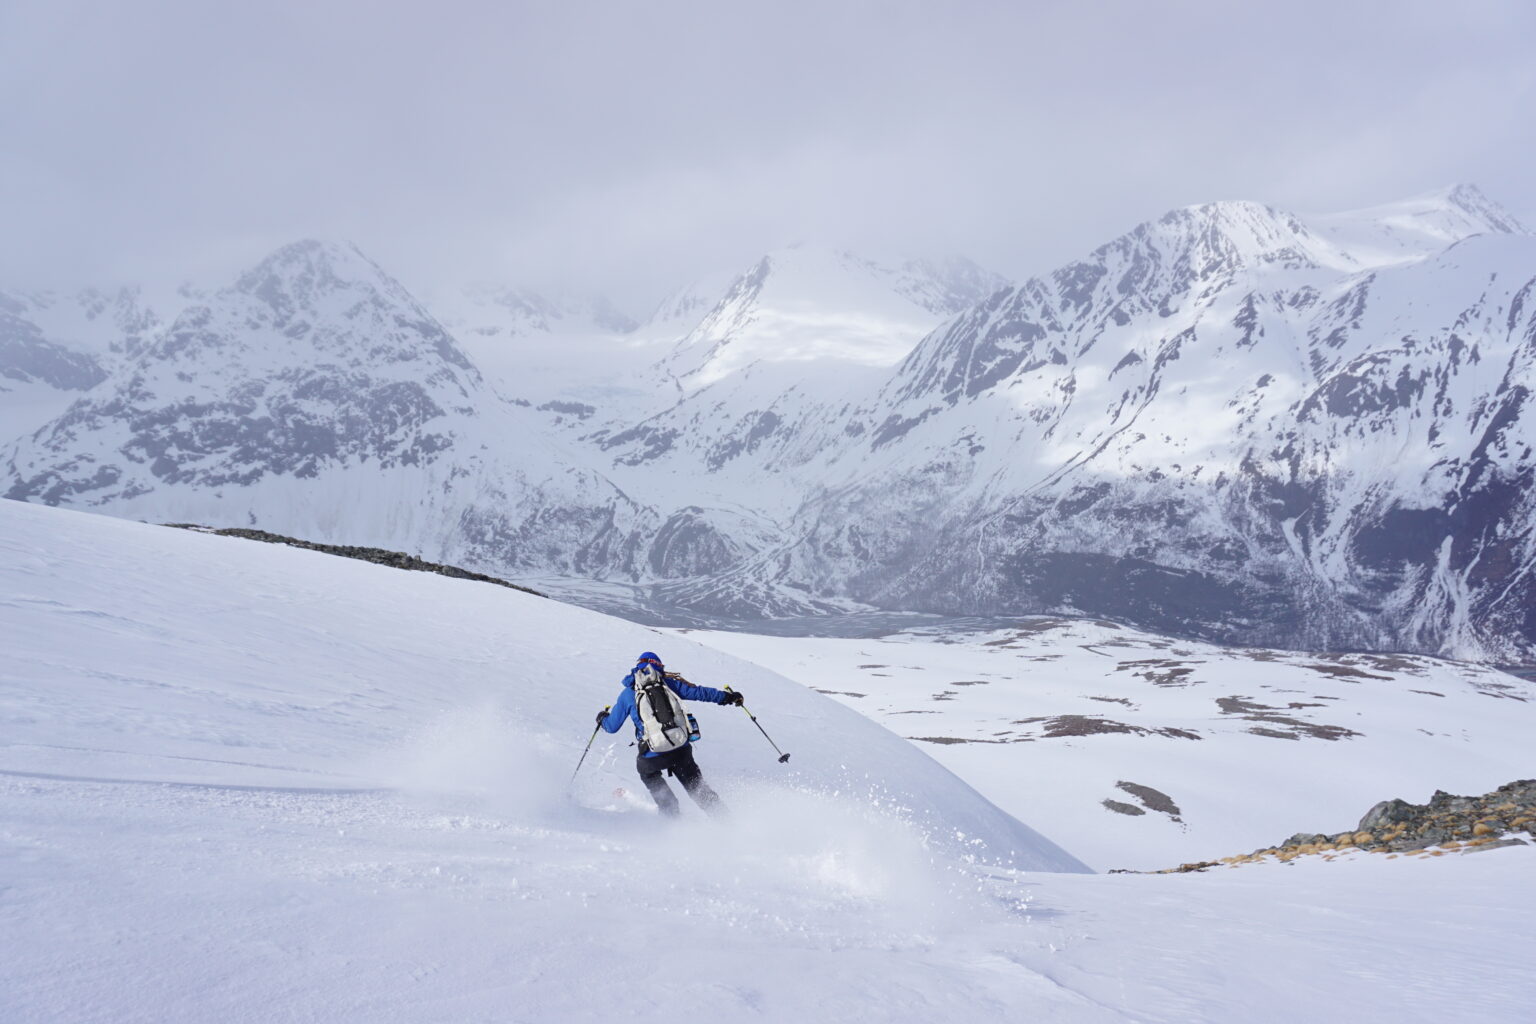 Skiing down the Northwest bowl of Daltinden in the Lyngen Alps of Norway